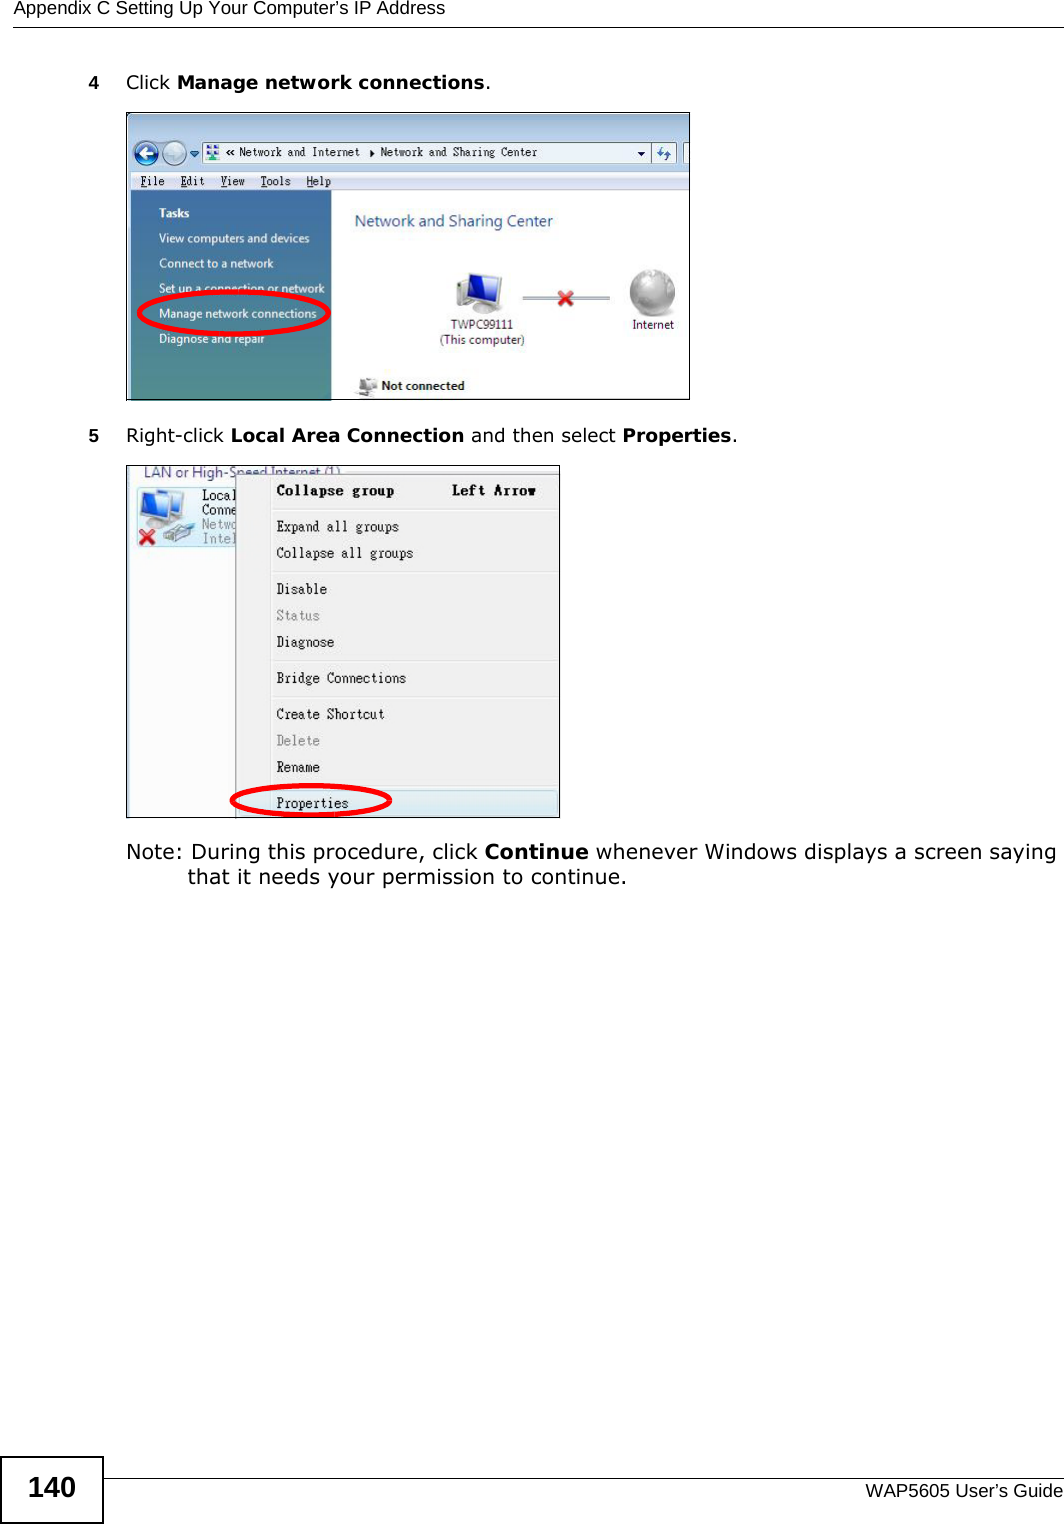 Appendix C Setting Up Your Computer’s IP AddressWAP5605 User’s Guide1404Click Manage network connections.5Right-click Local Area Connection and then select Properties.Note: During this procedure, click Continue whenever Windows displays a screen saying that it needs your permission to continue.